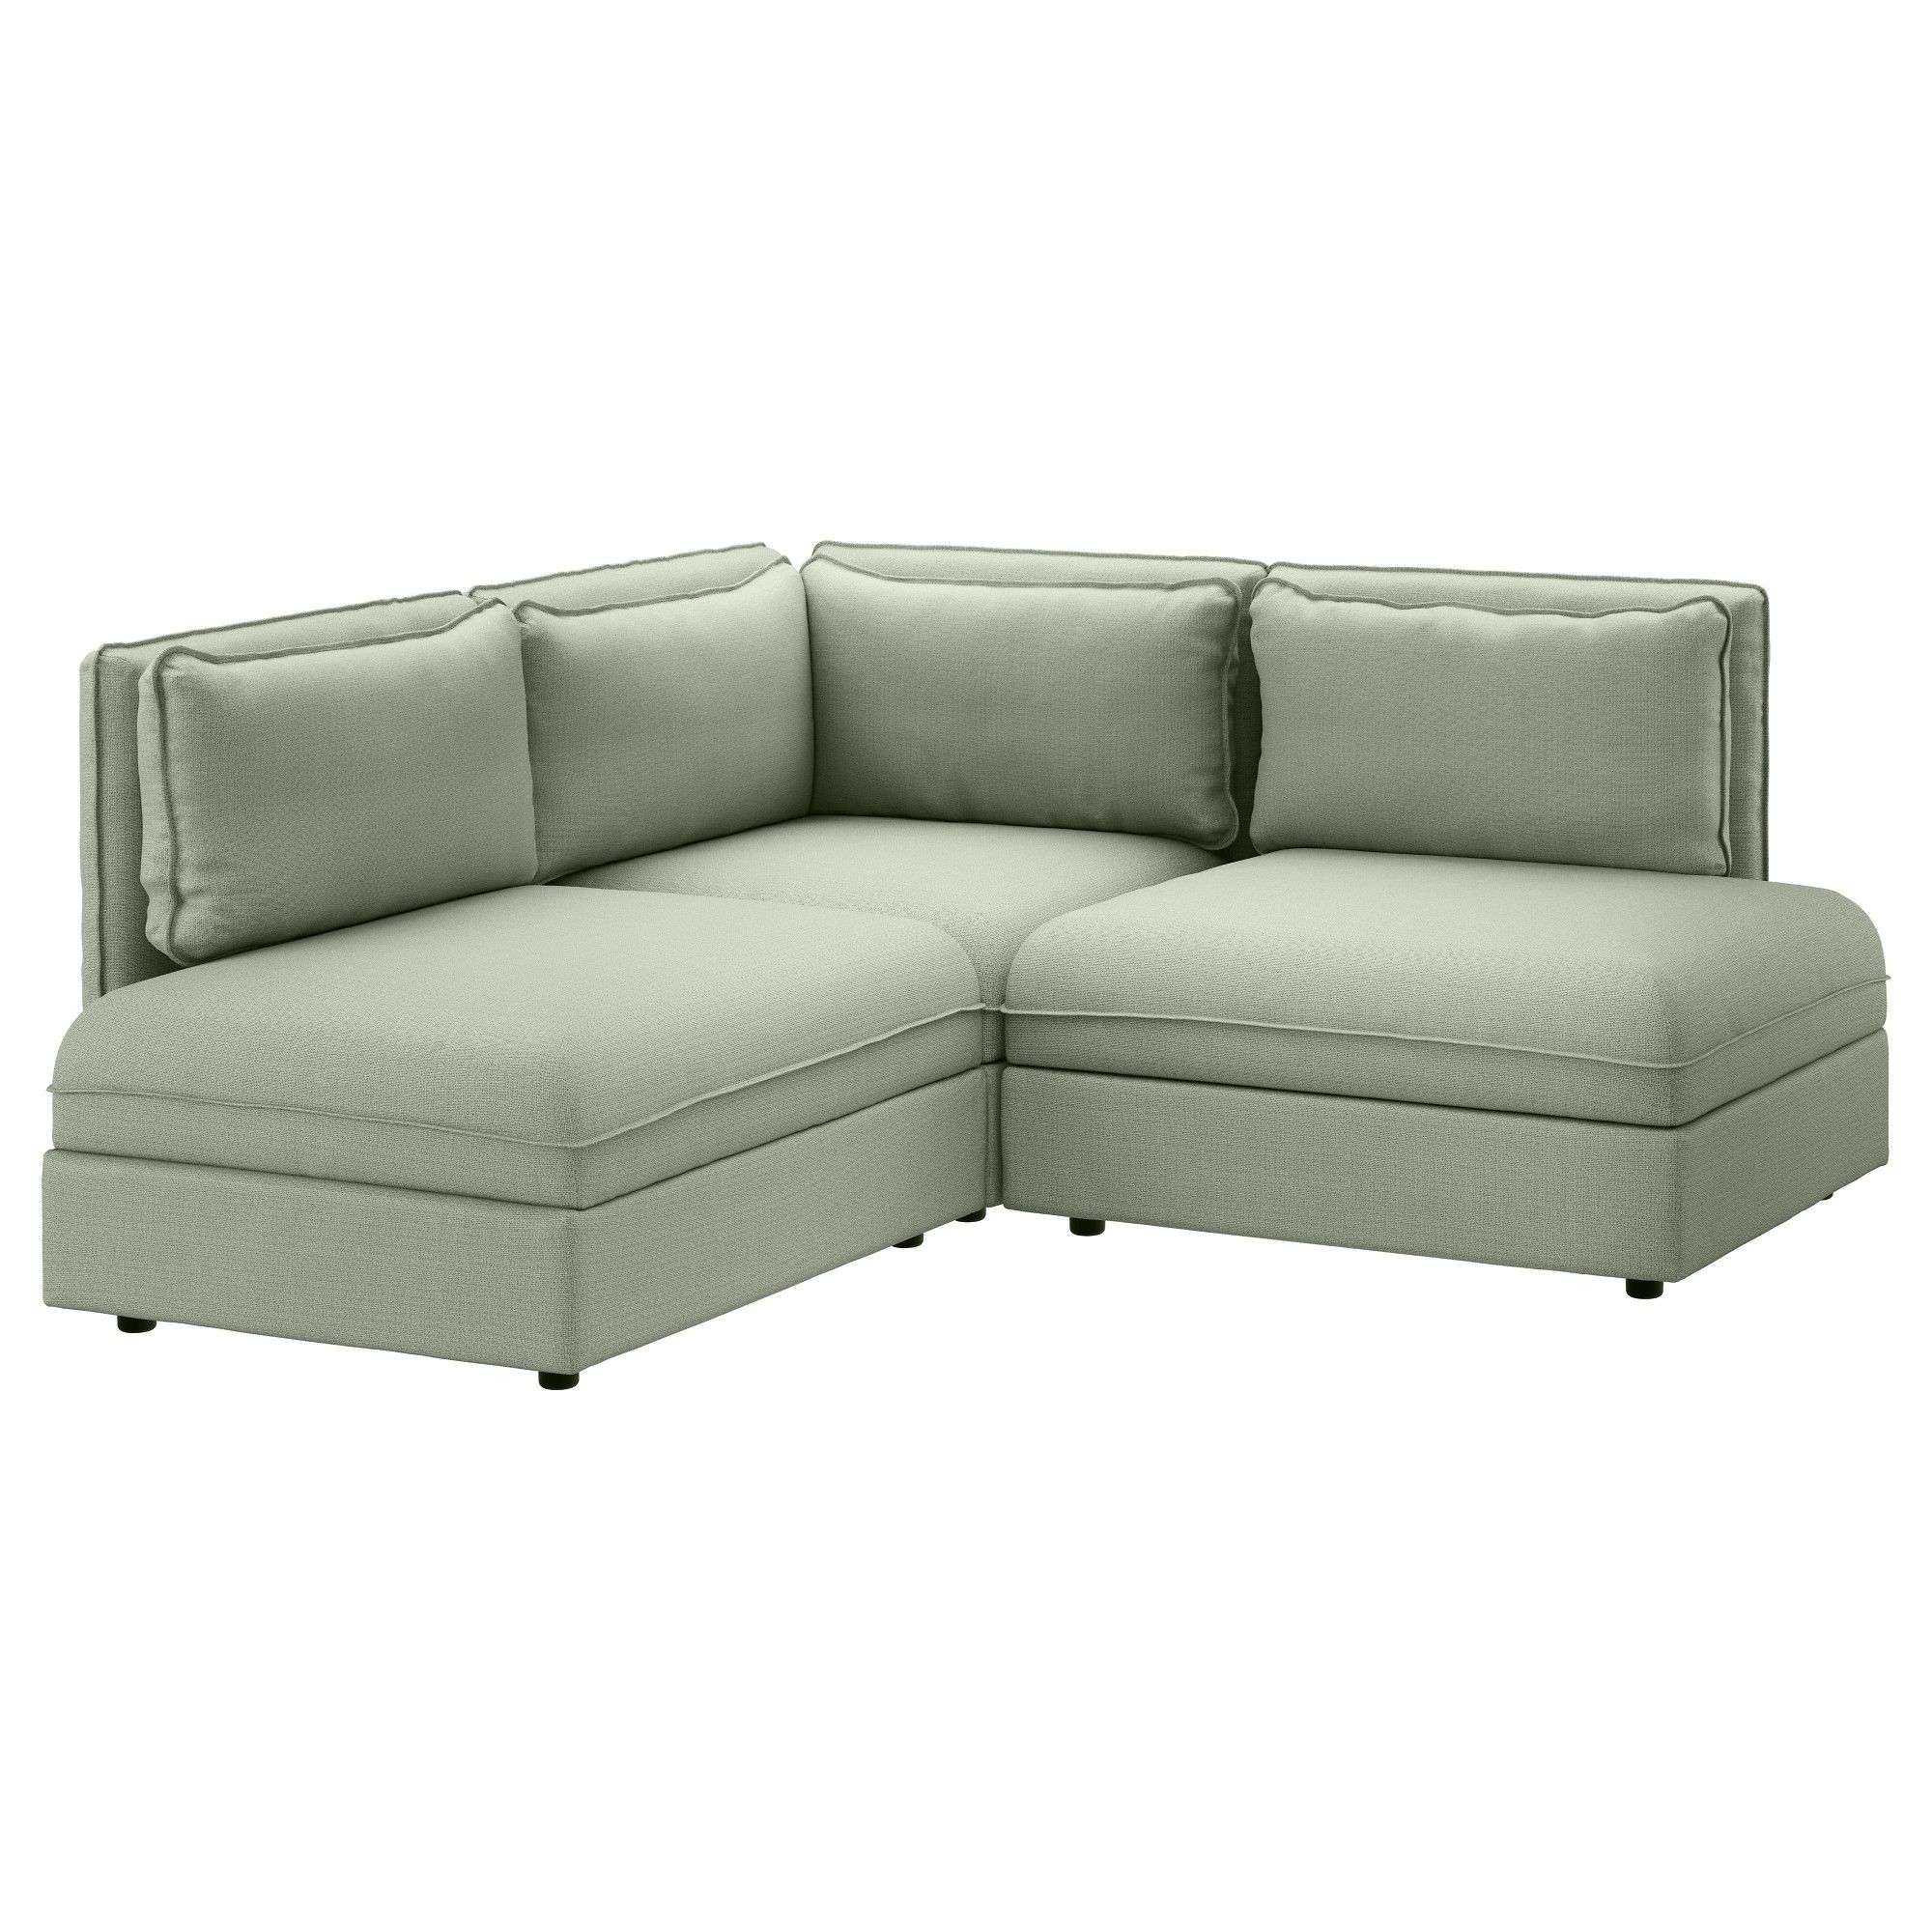 Luxury Sectional Sofas Ikea 94 Sofas And Couches Ideas With With Regard To Sectional Sofas At Ikea (Photo 6 of 10)